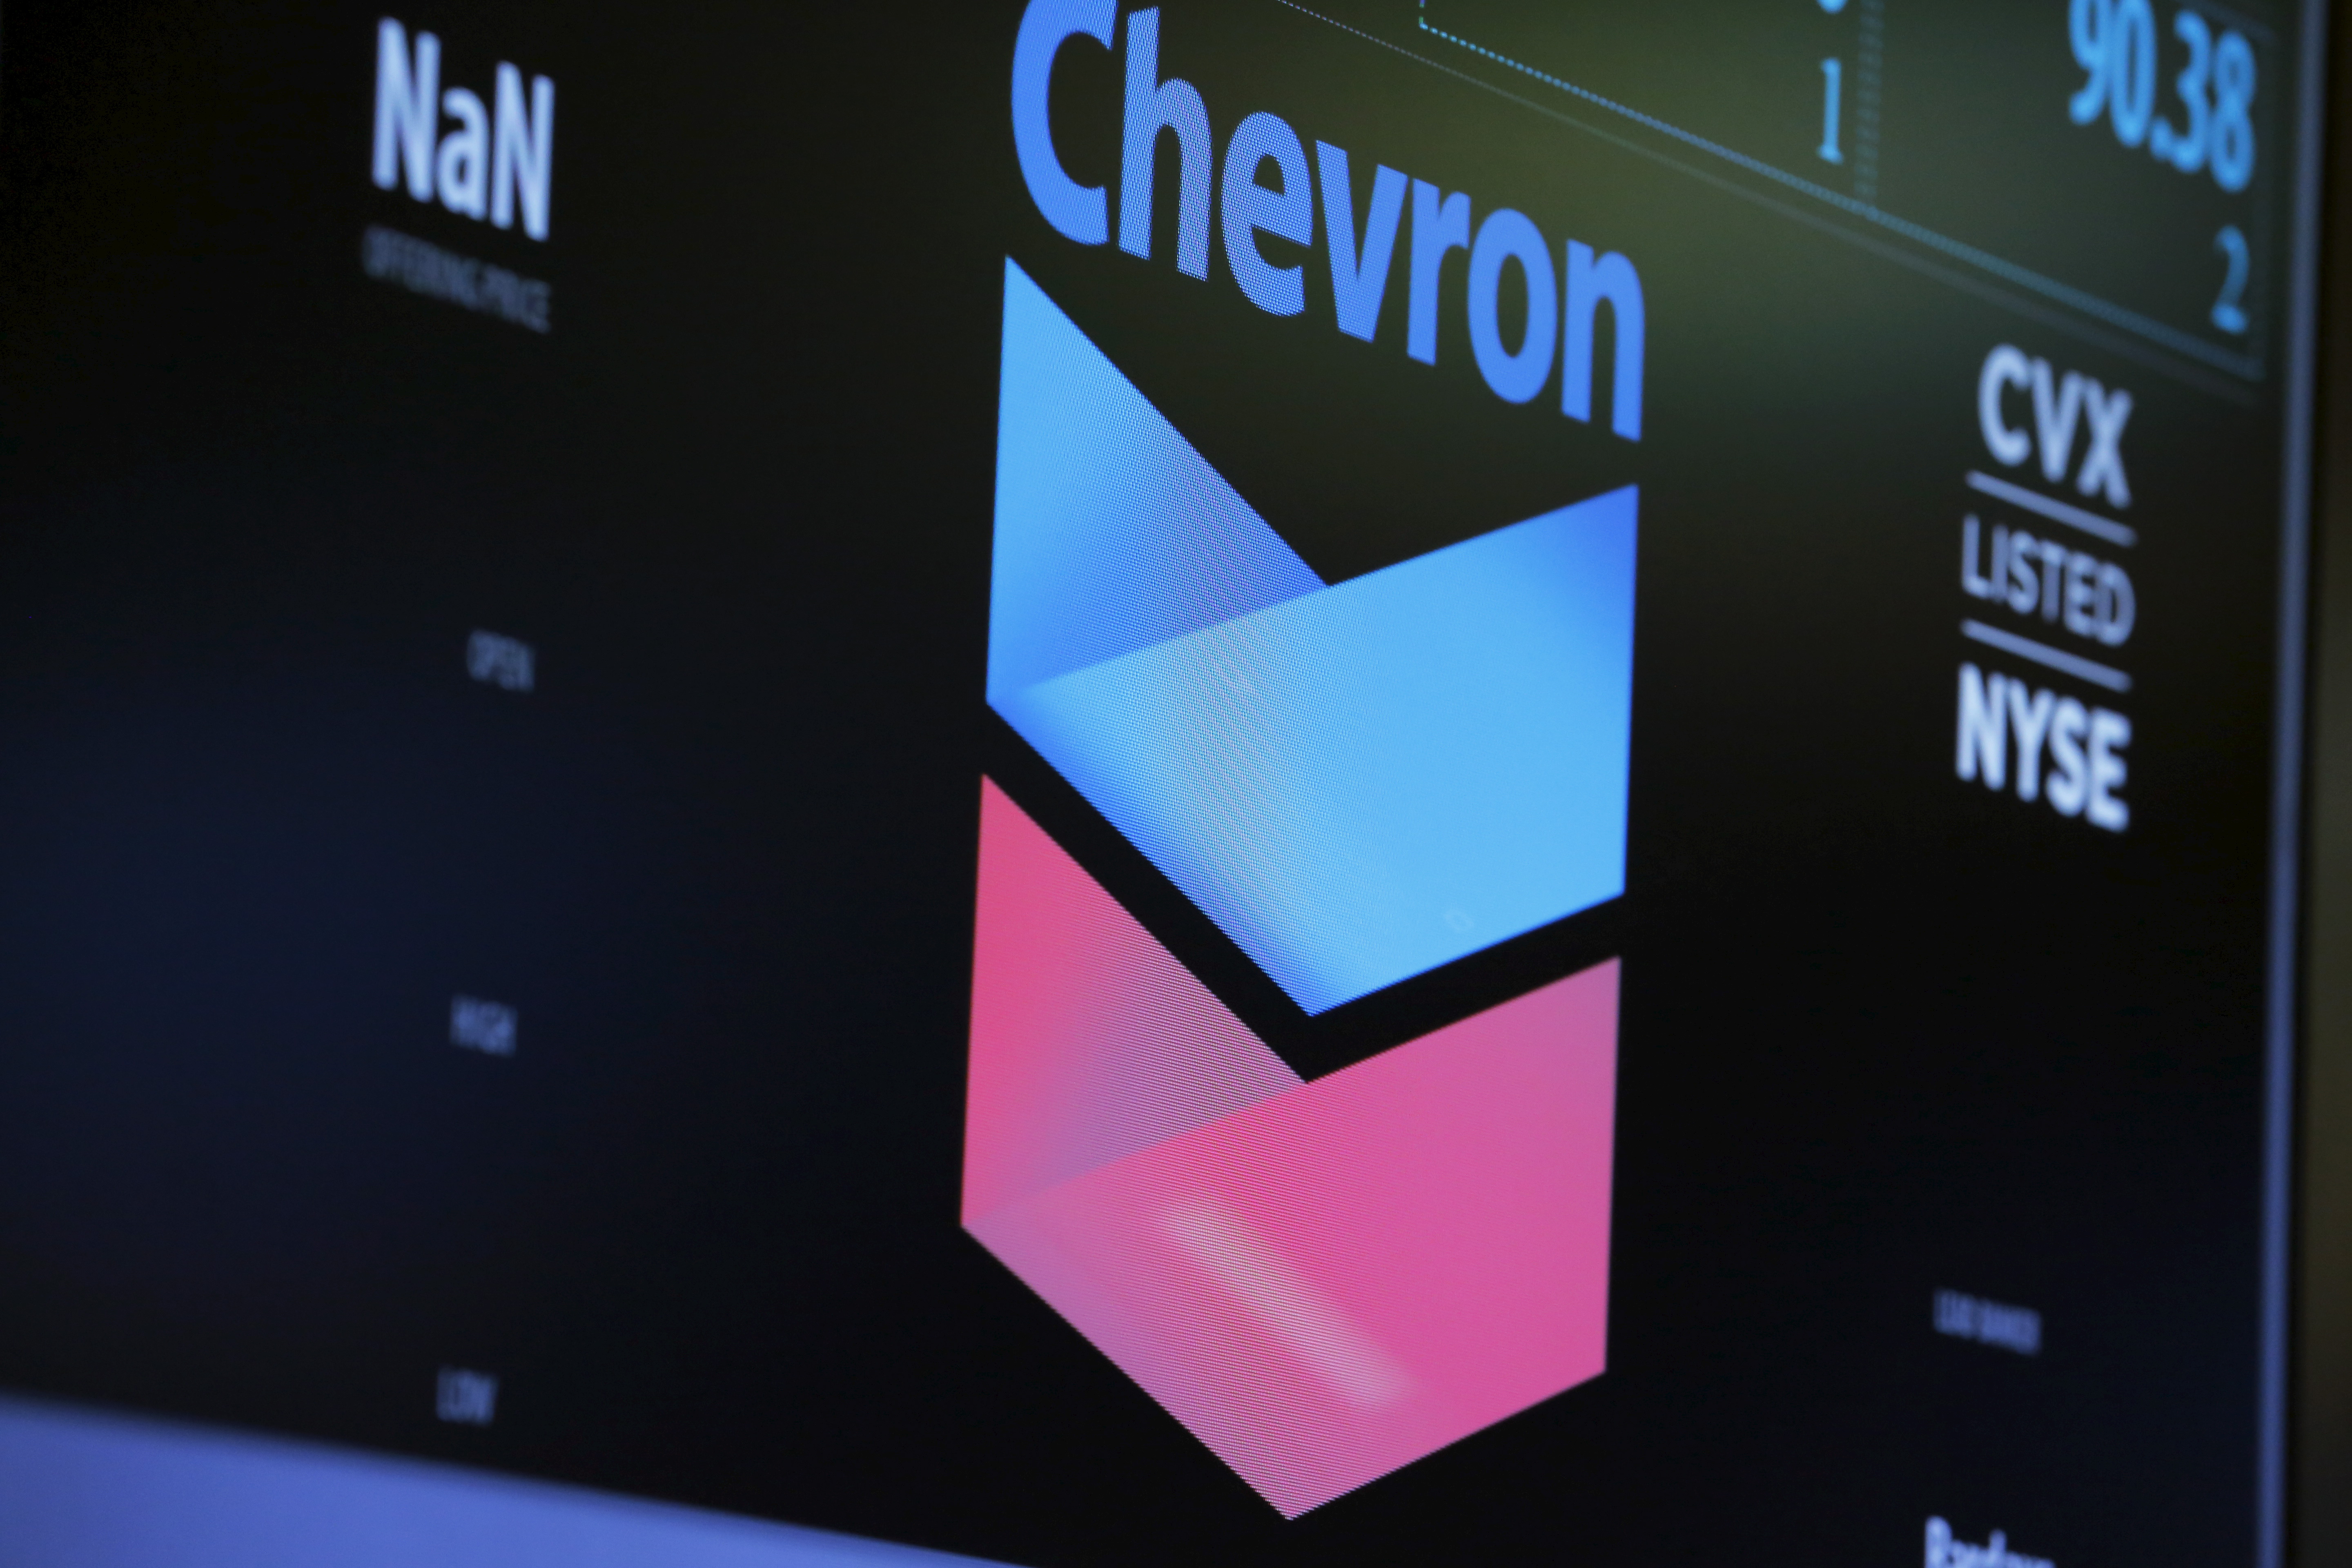 The logo of Chevron is shown on a monitor above the floor of the New York Stock Exchange in New York